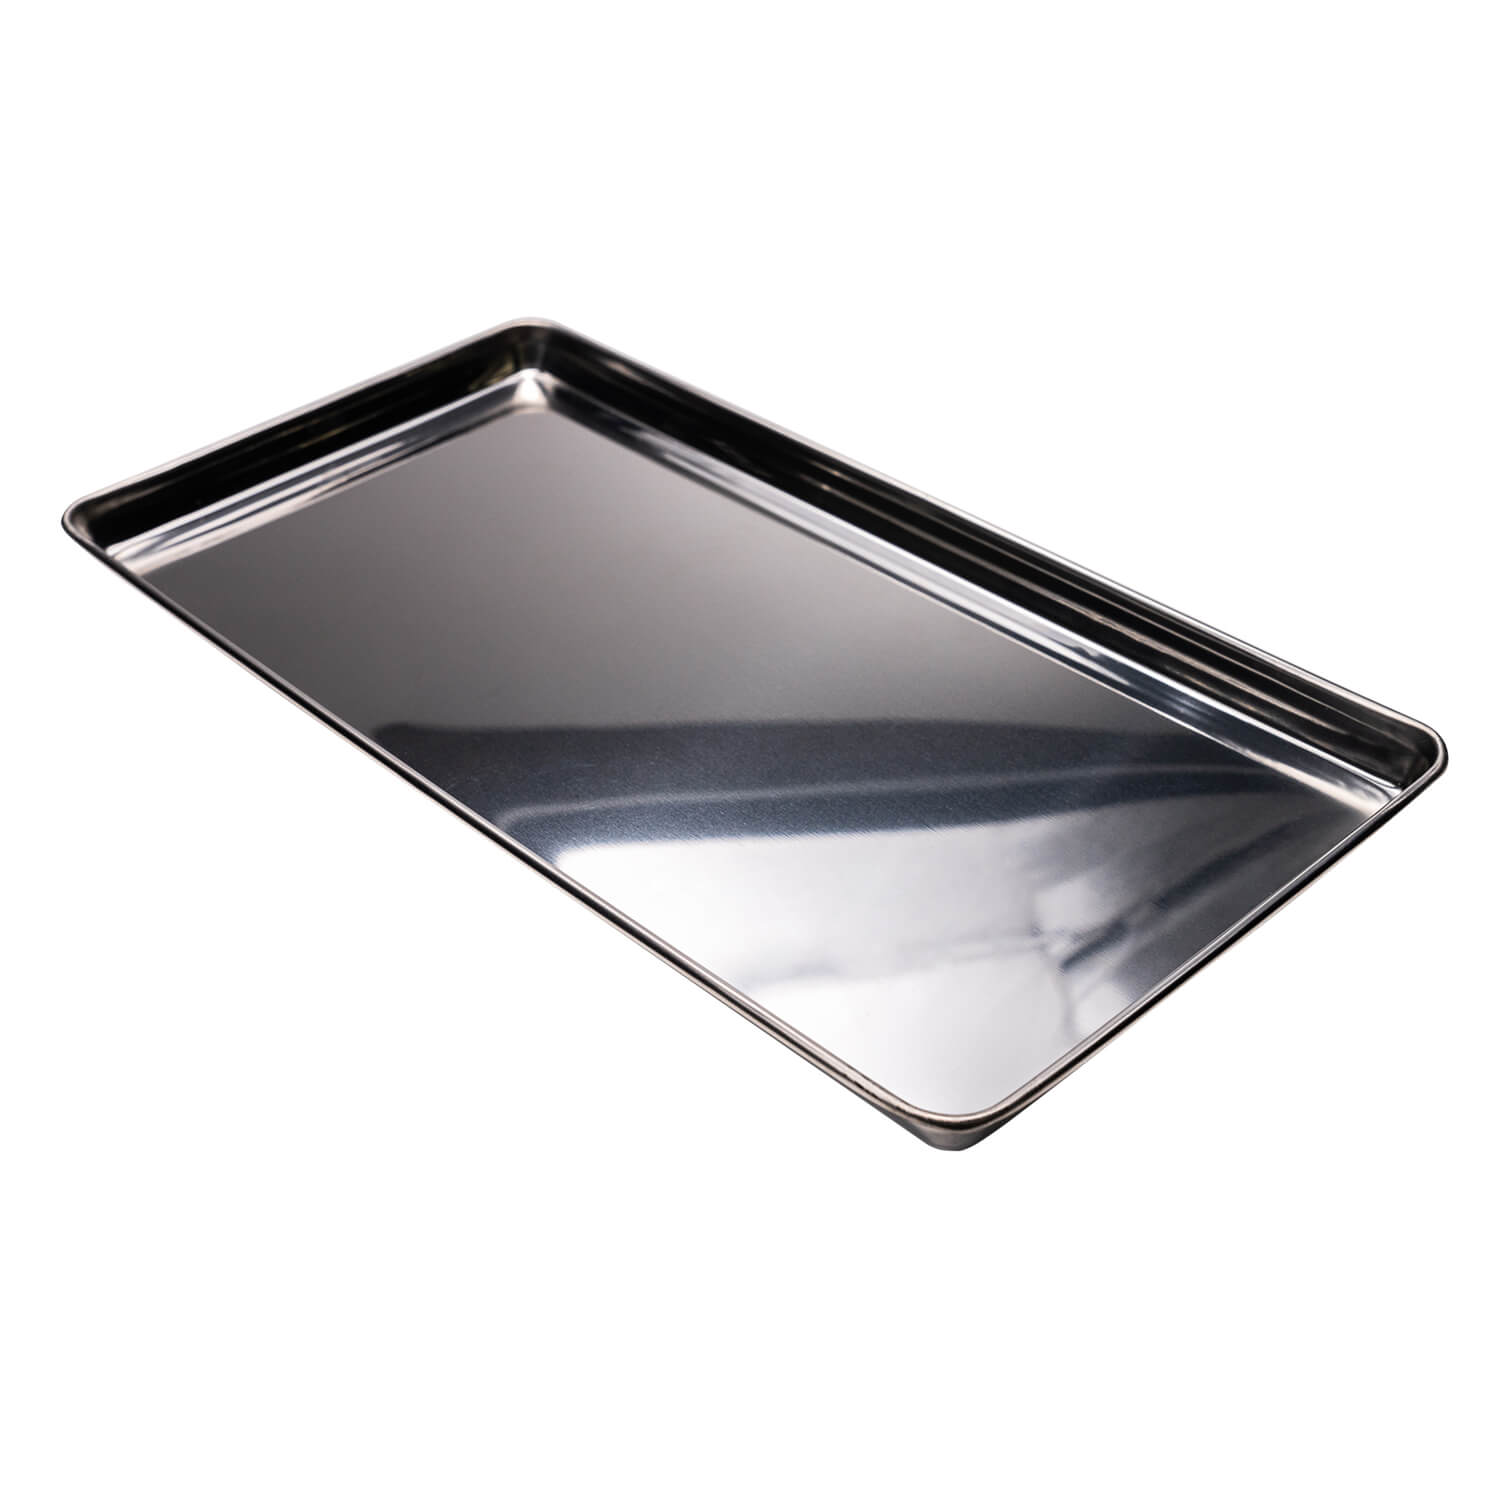 TATSoul Stainless Steel Tray for tattoo supplies.